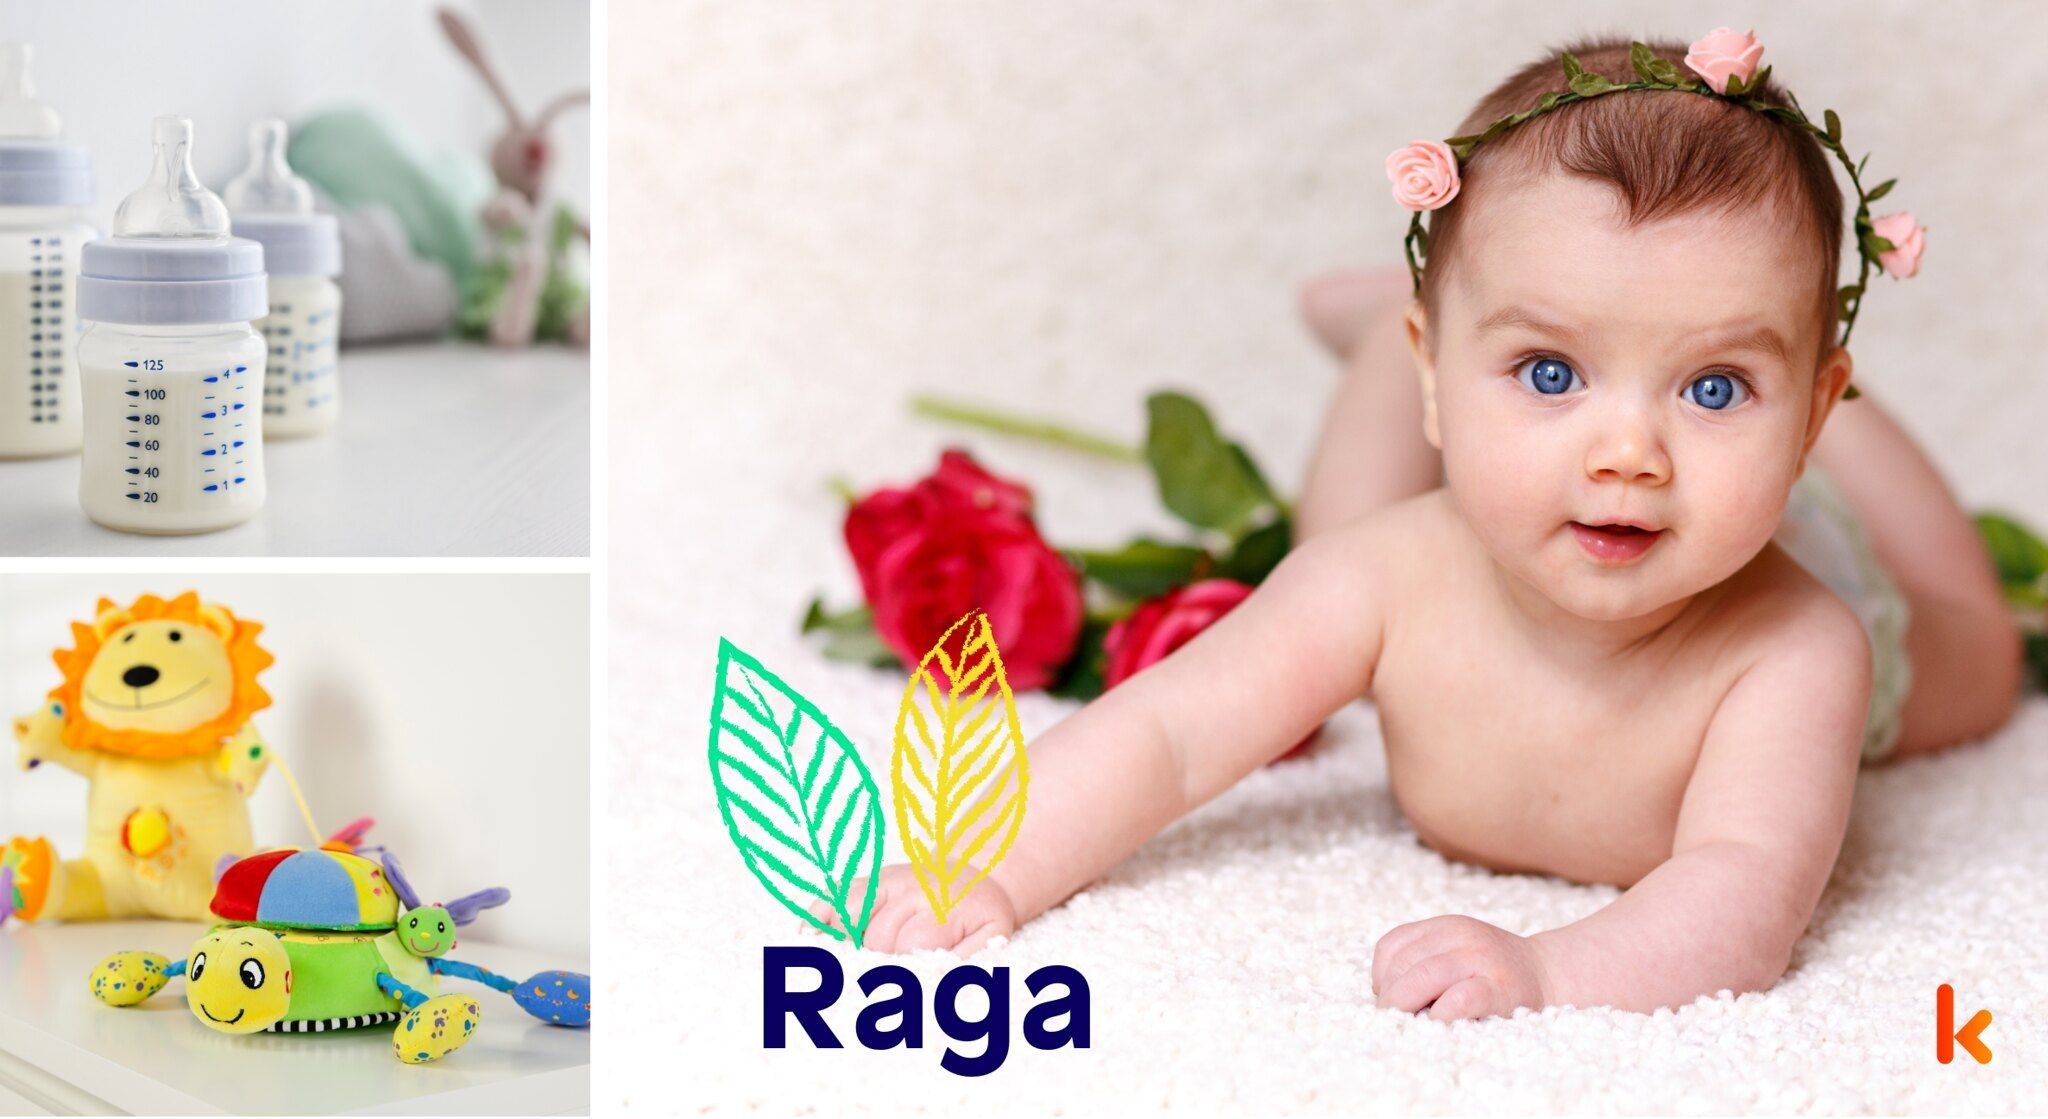 Meaning of the name Raga